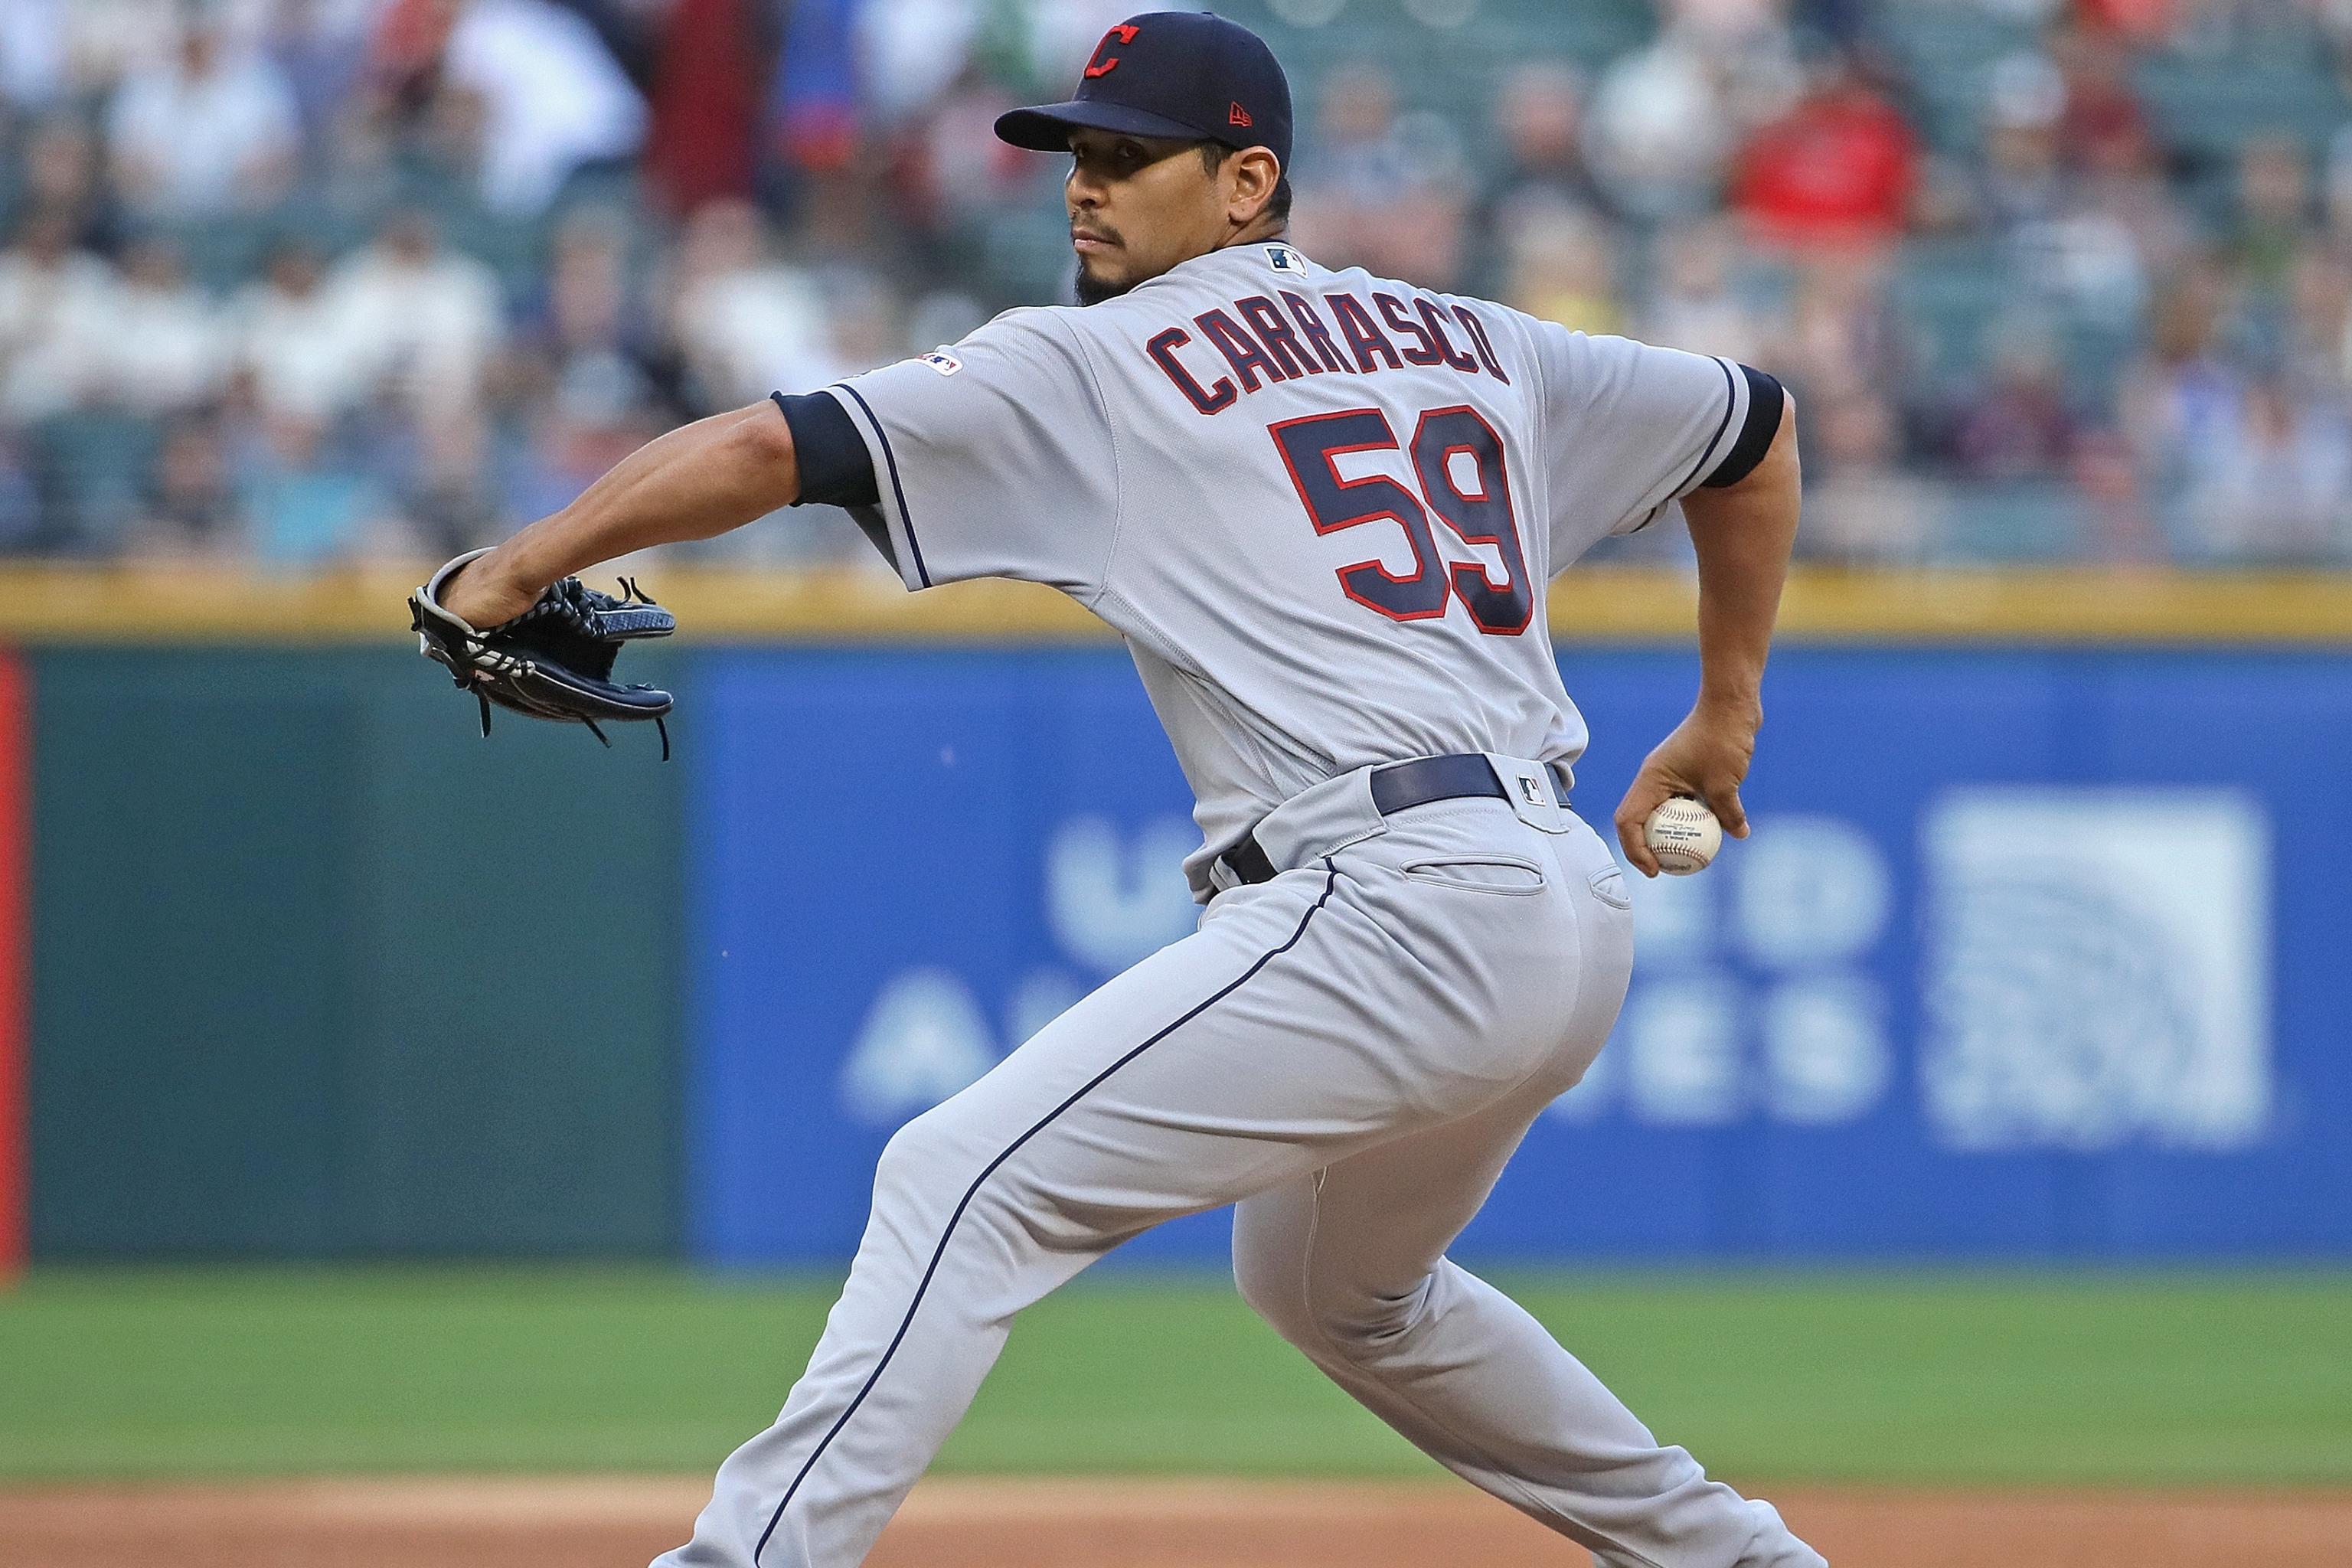 Cleveland Indians pitcher Carlos Carrasco, 32, reveals he is